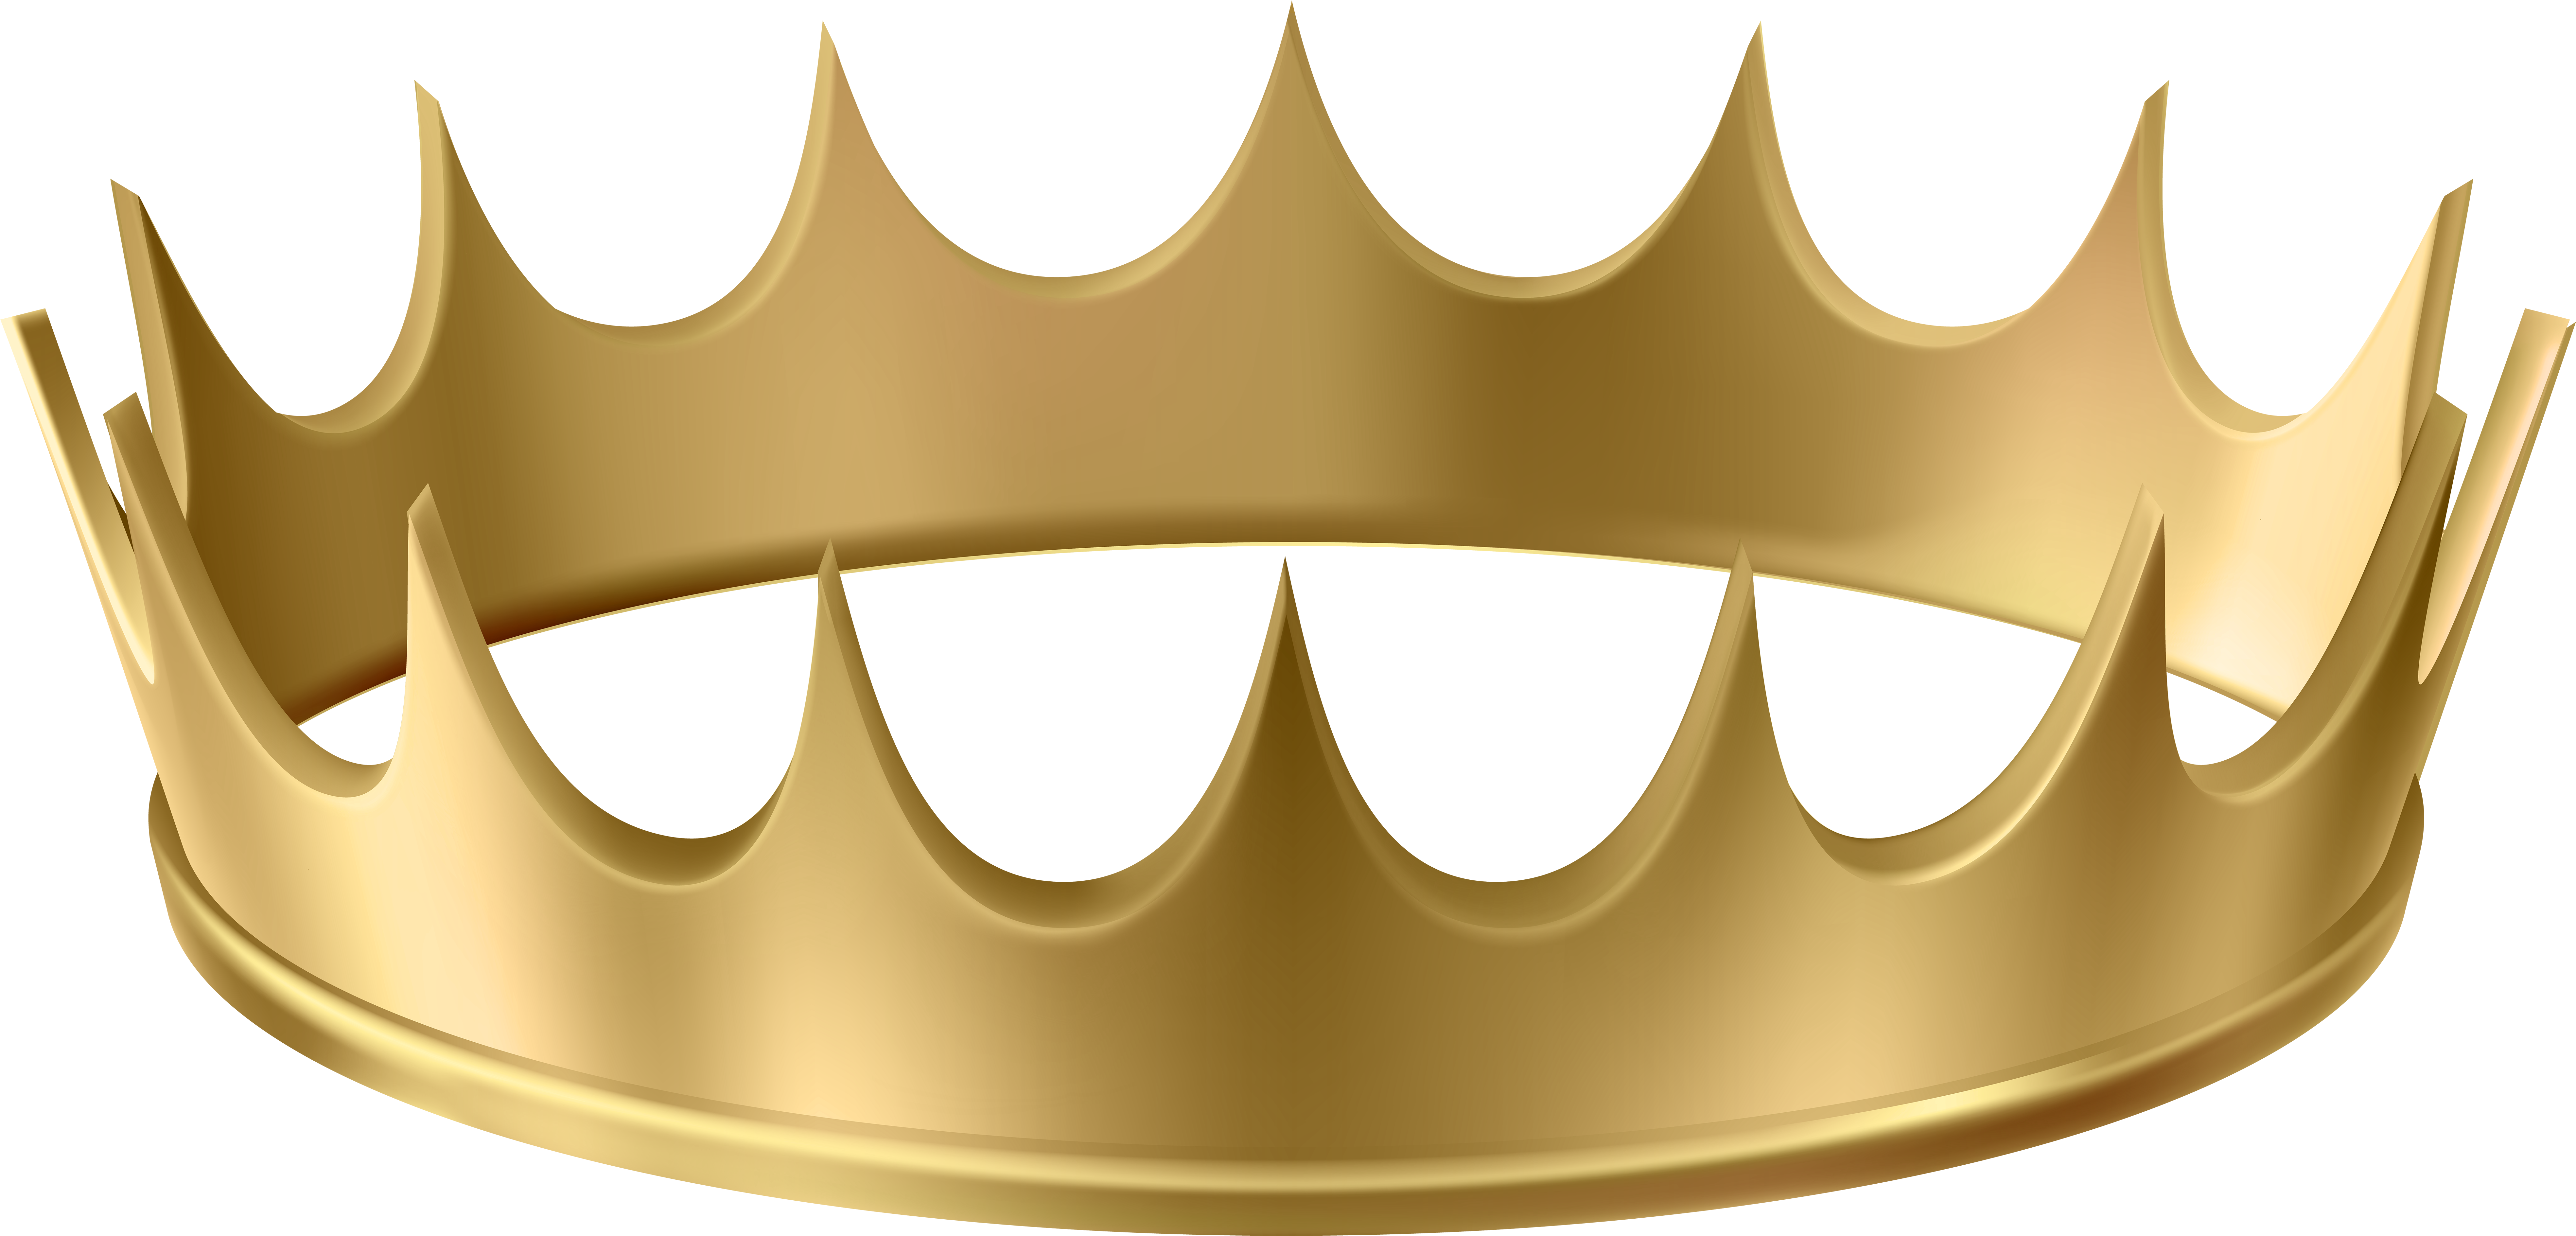 Amazing Transparent Image With Background Crowns Emoji Crown